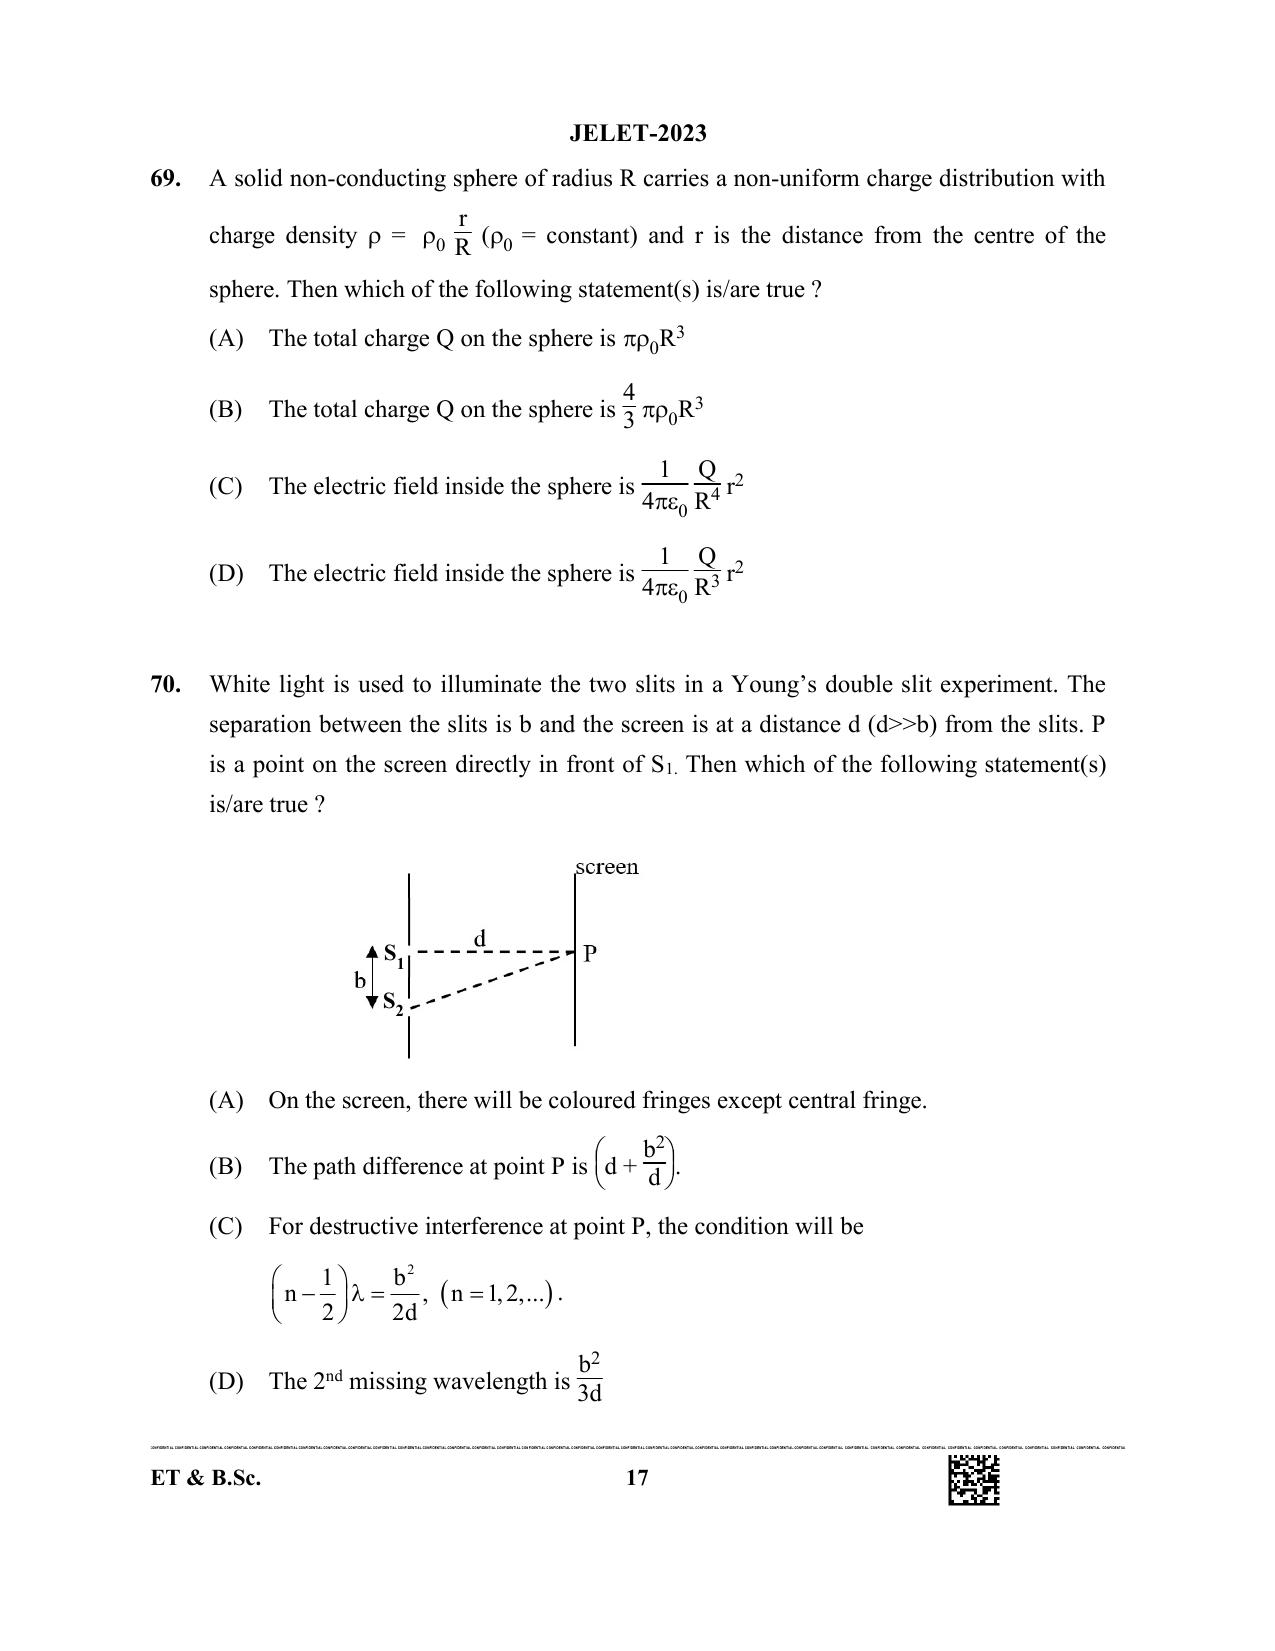 WBJEE JELET 2023 Paper I (ET & BSC) Question Papers - Page 17